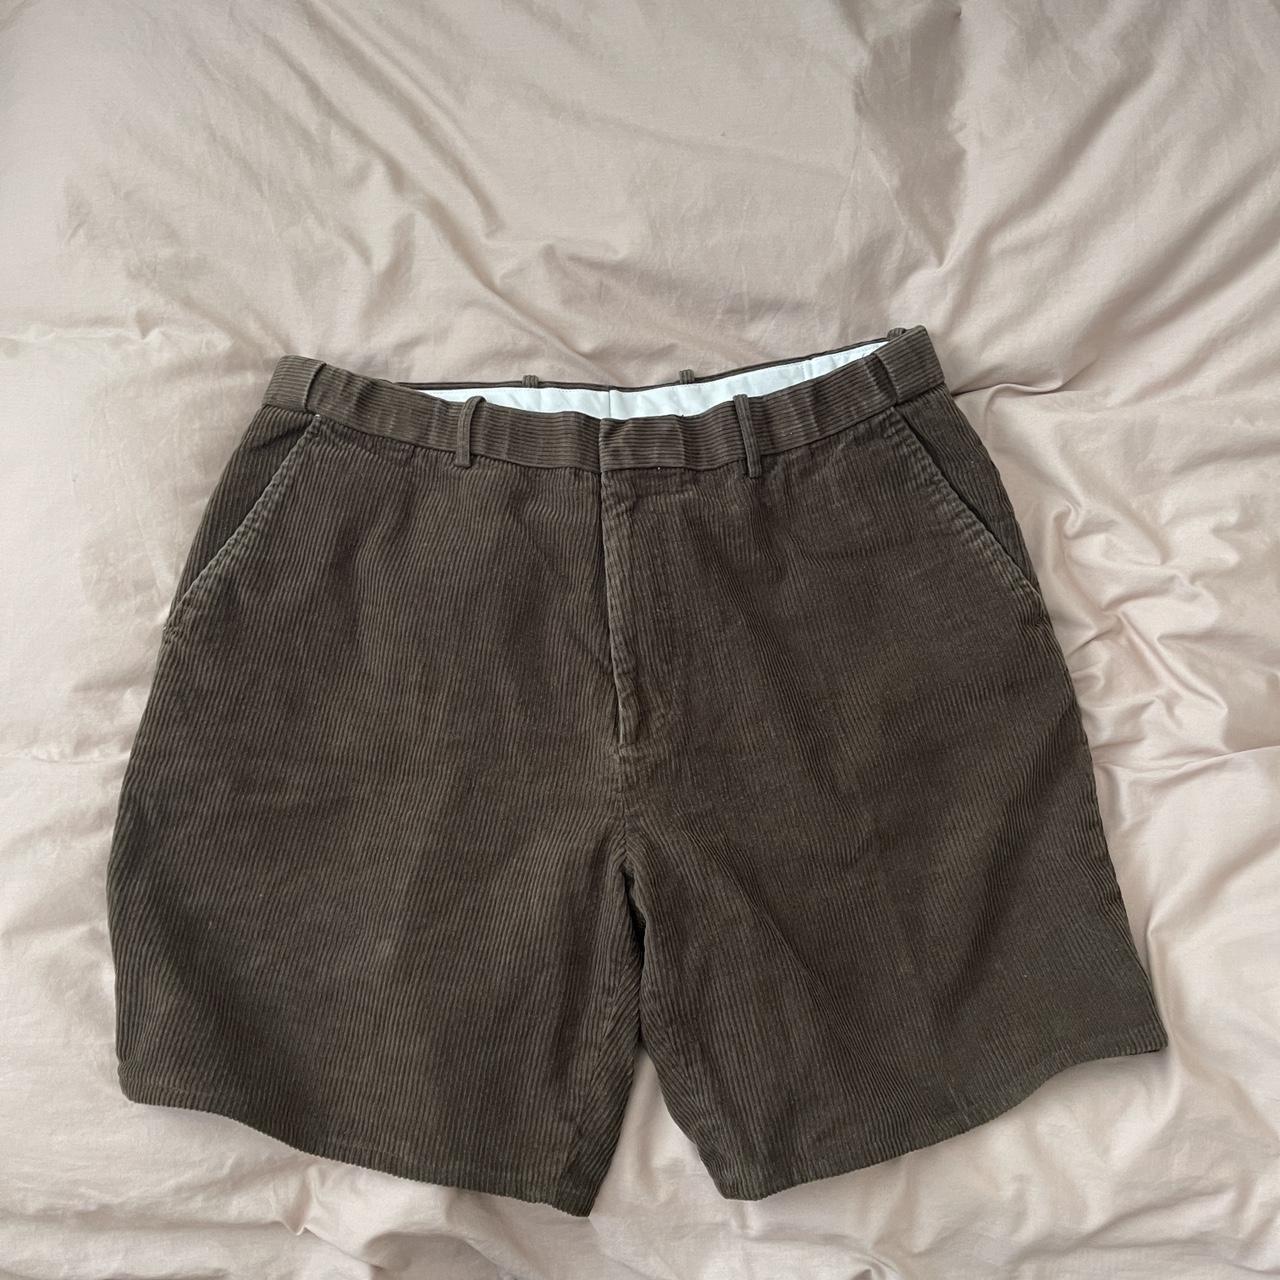 Chums Corduroy shorts W38 (probably fits more like a... - Depop